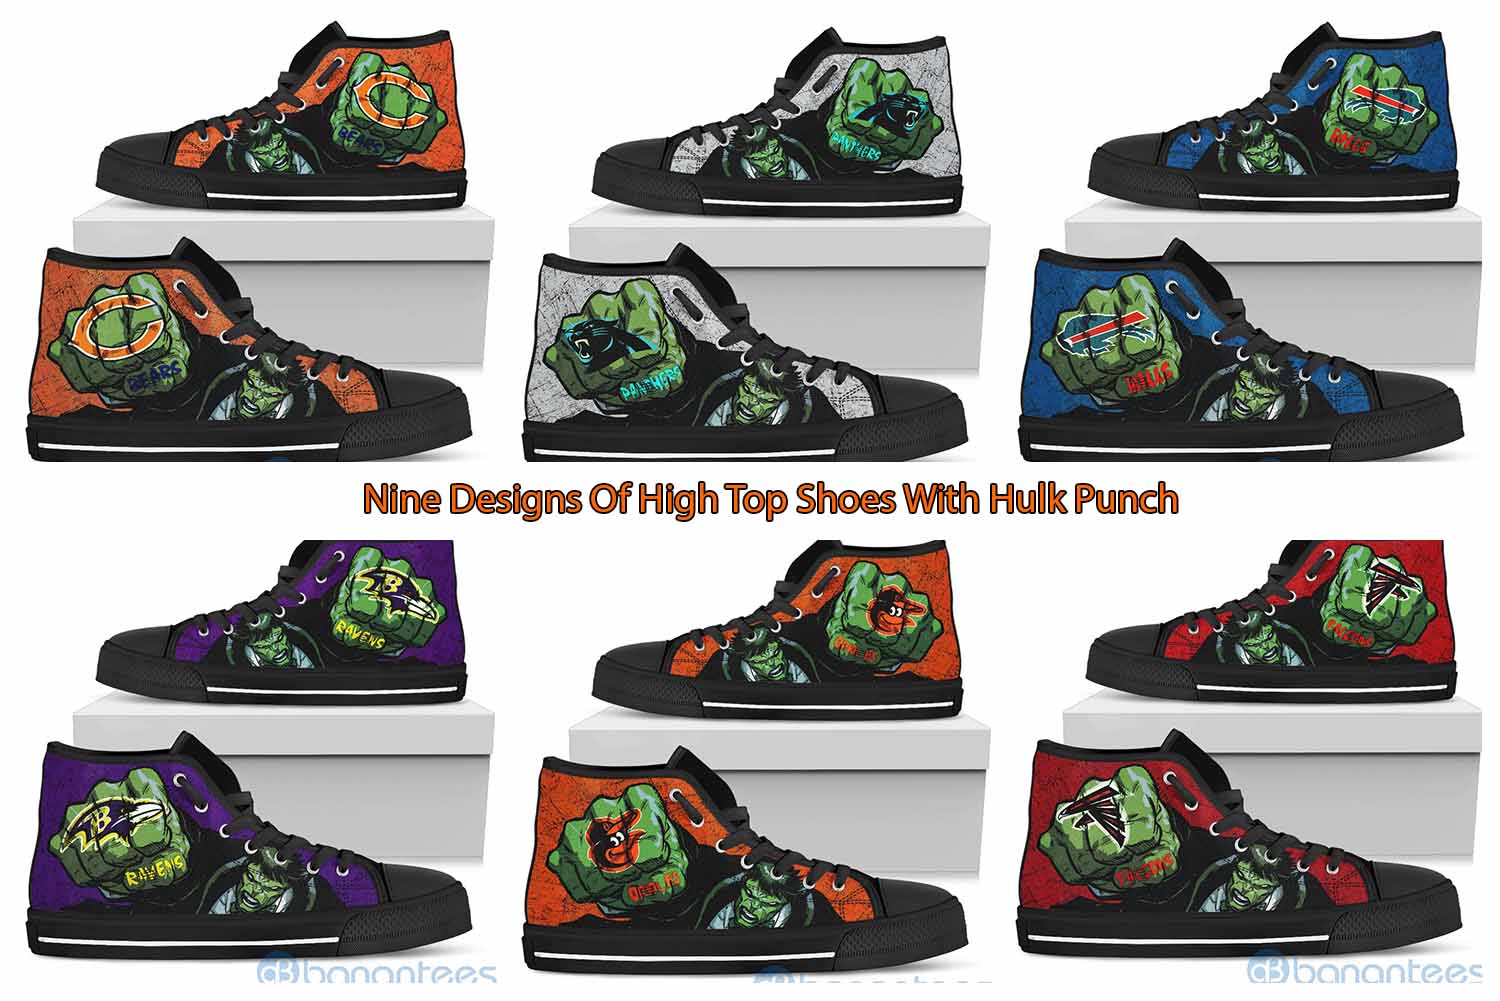 Nine Designs Of High Top Shoes With Hulk Punch